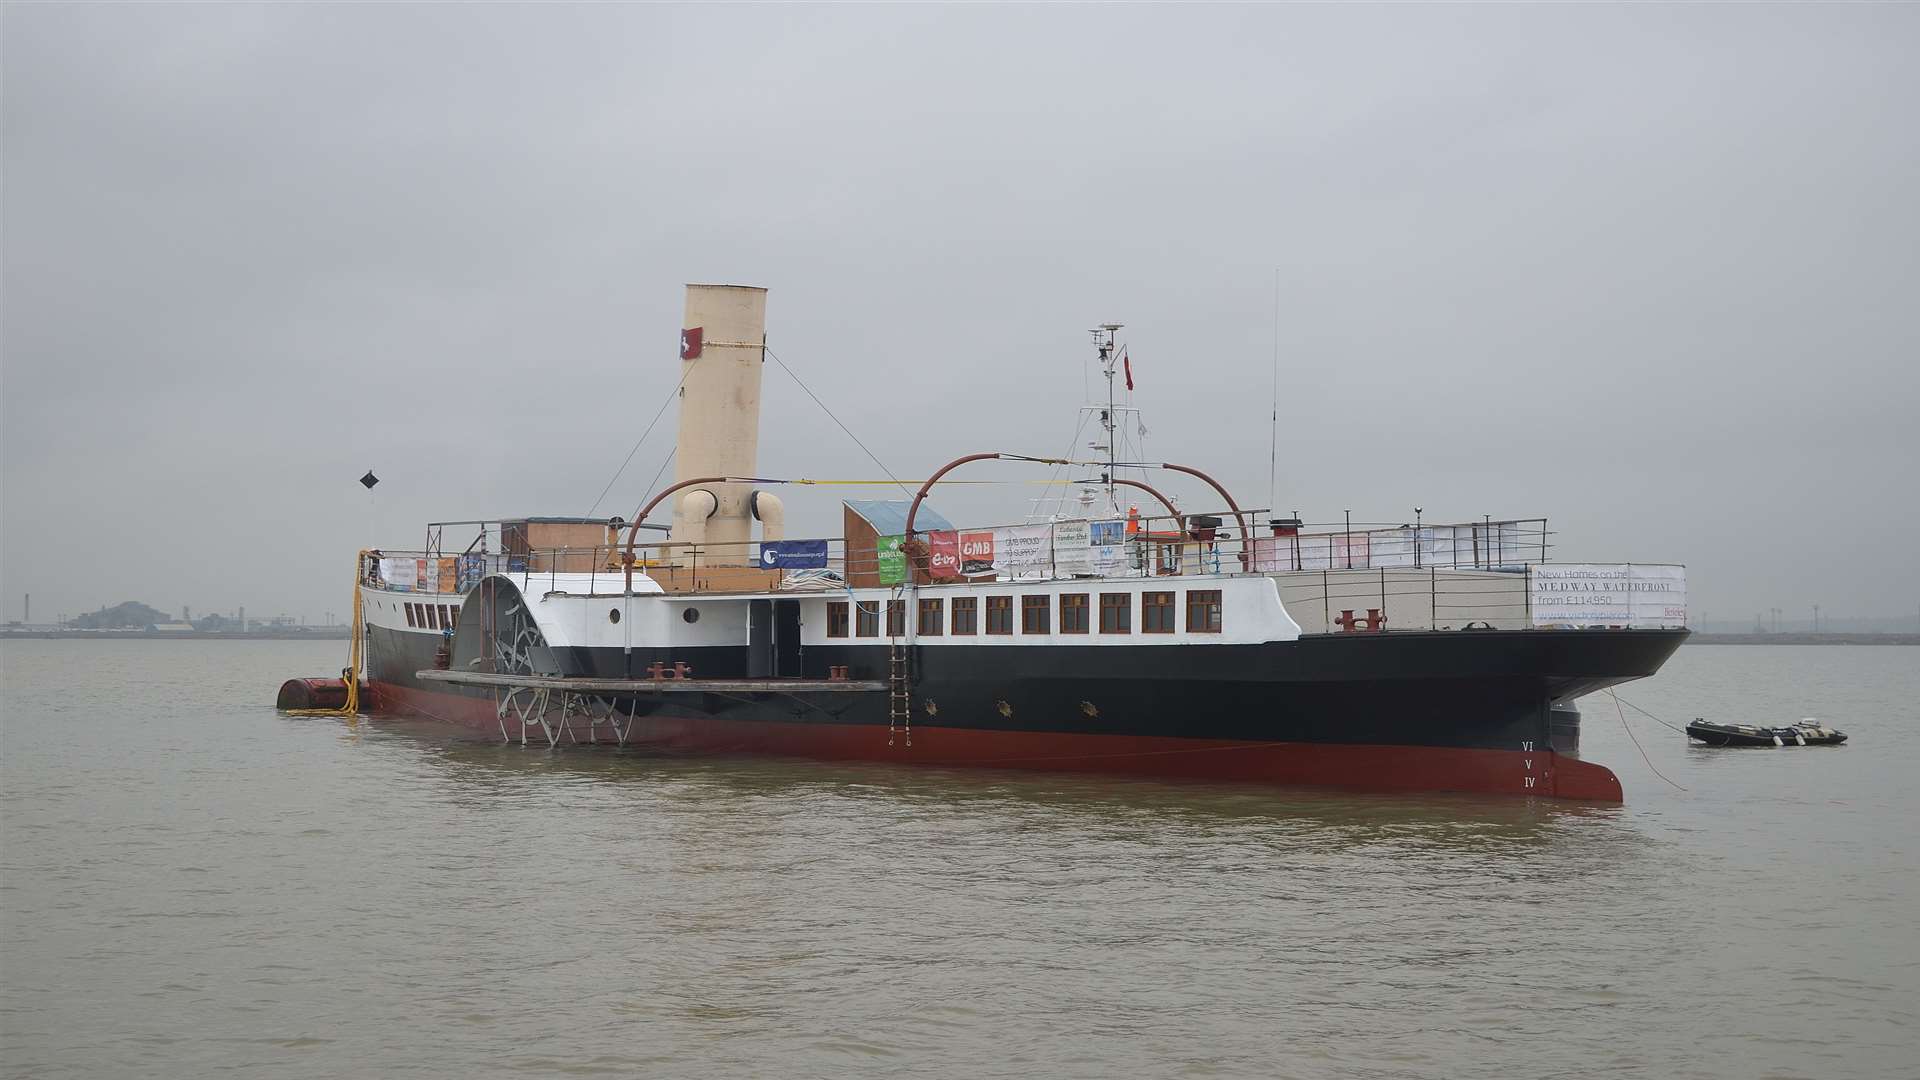 The Medway Queen in the Medway estuary. Picture: Jason Arthur